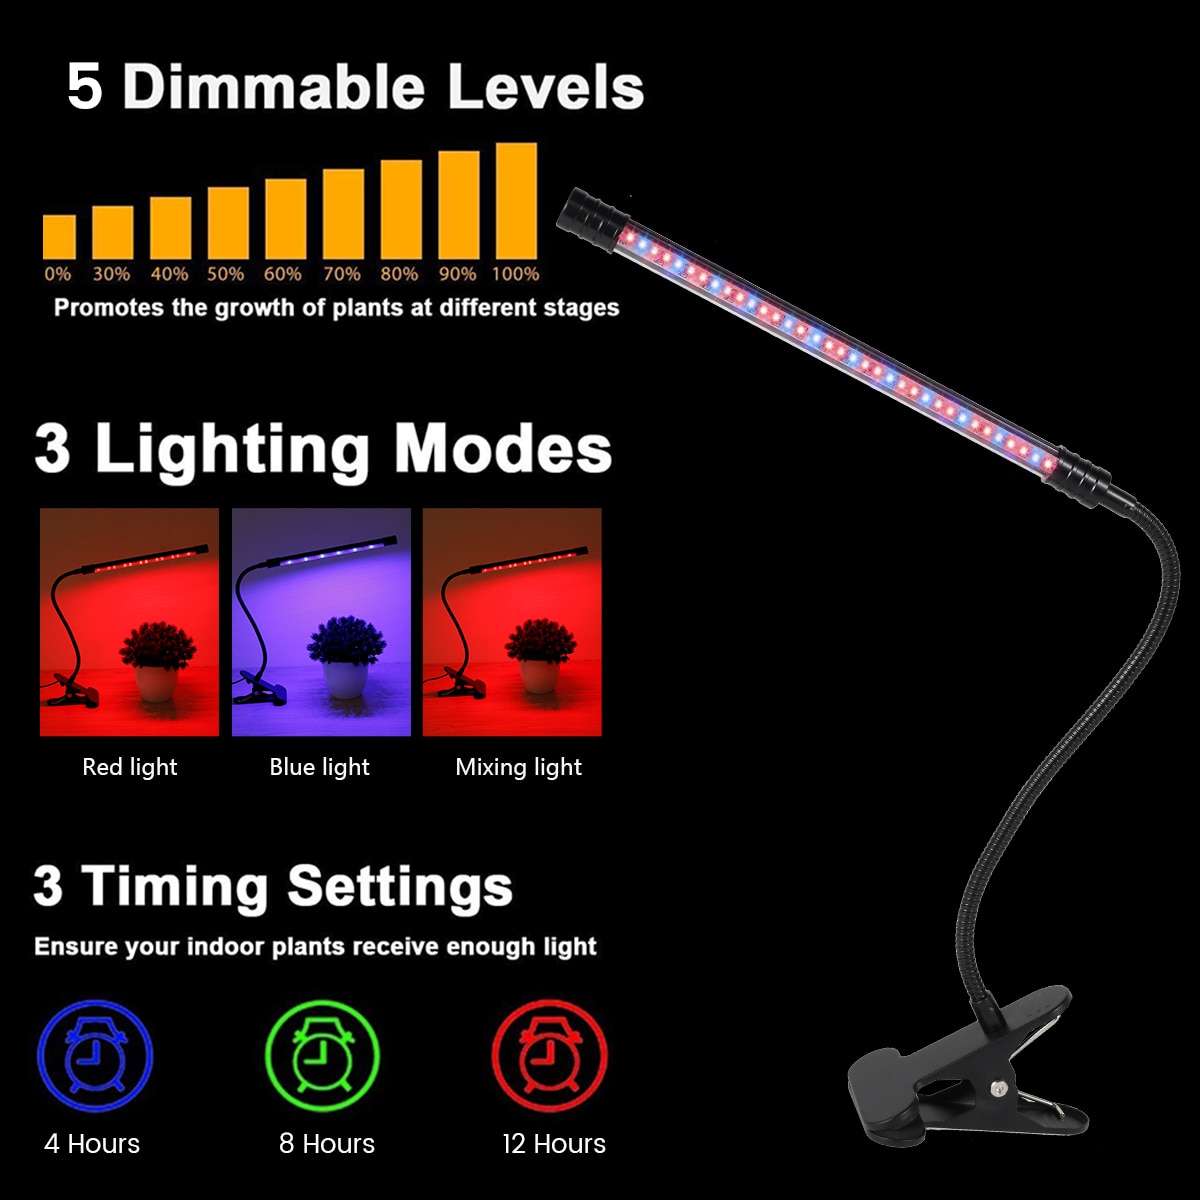 USB LED Grow Light Full Spectrum Phytolamps Red & Blue Plant Growing Lamp With Clip 5 Level Dimmable Waterproof Growing Lamp